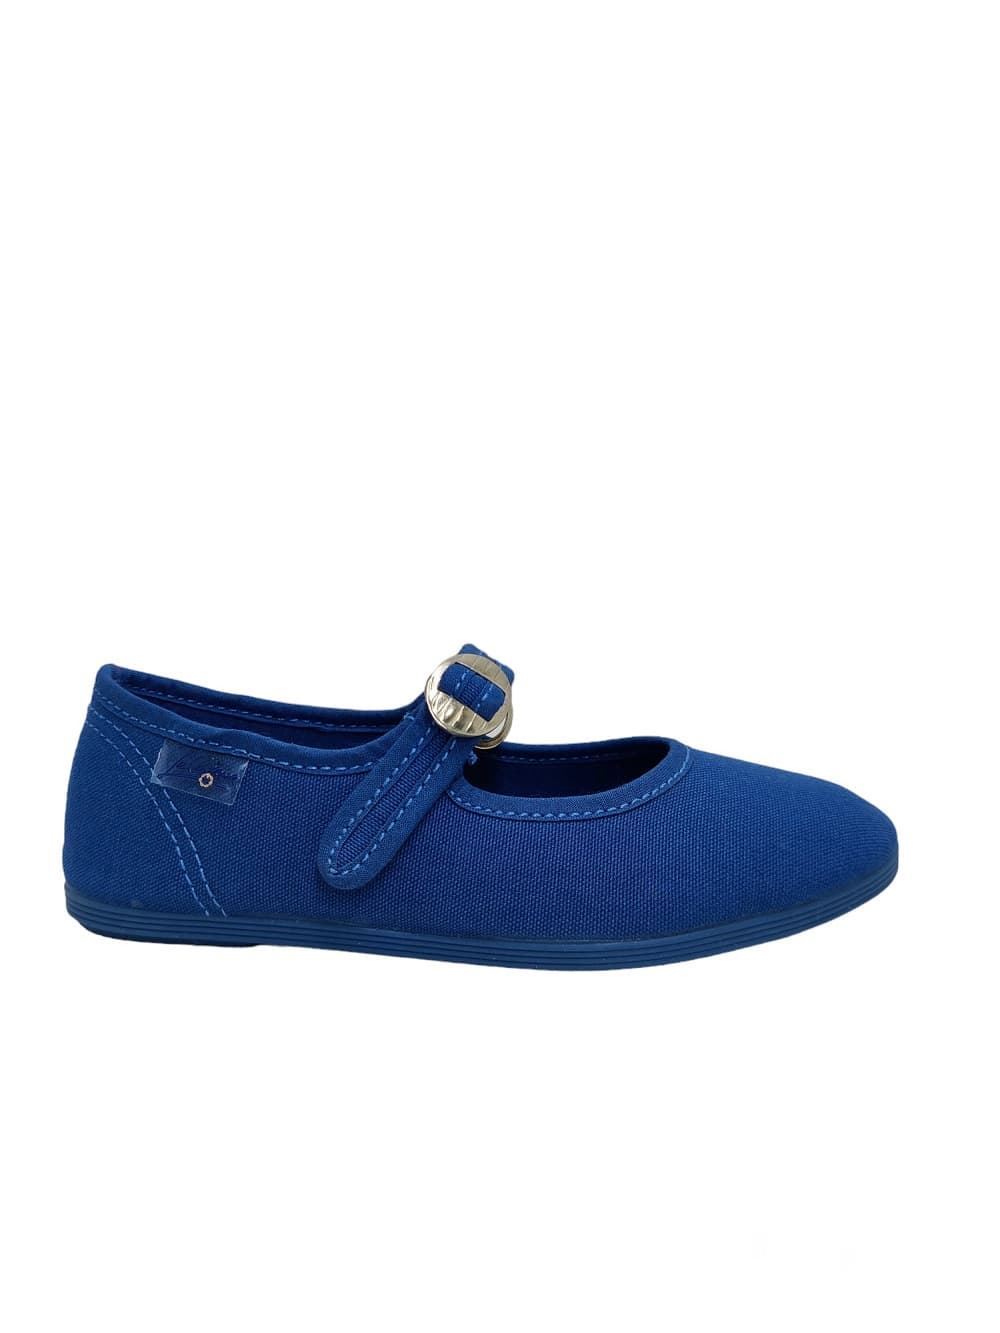 The Merceditas Chain for girls Blue Canvas - Image 2